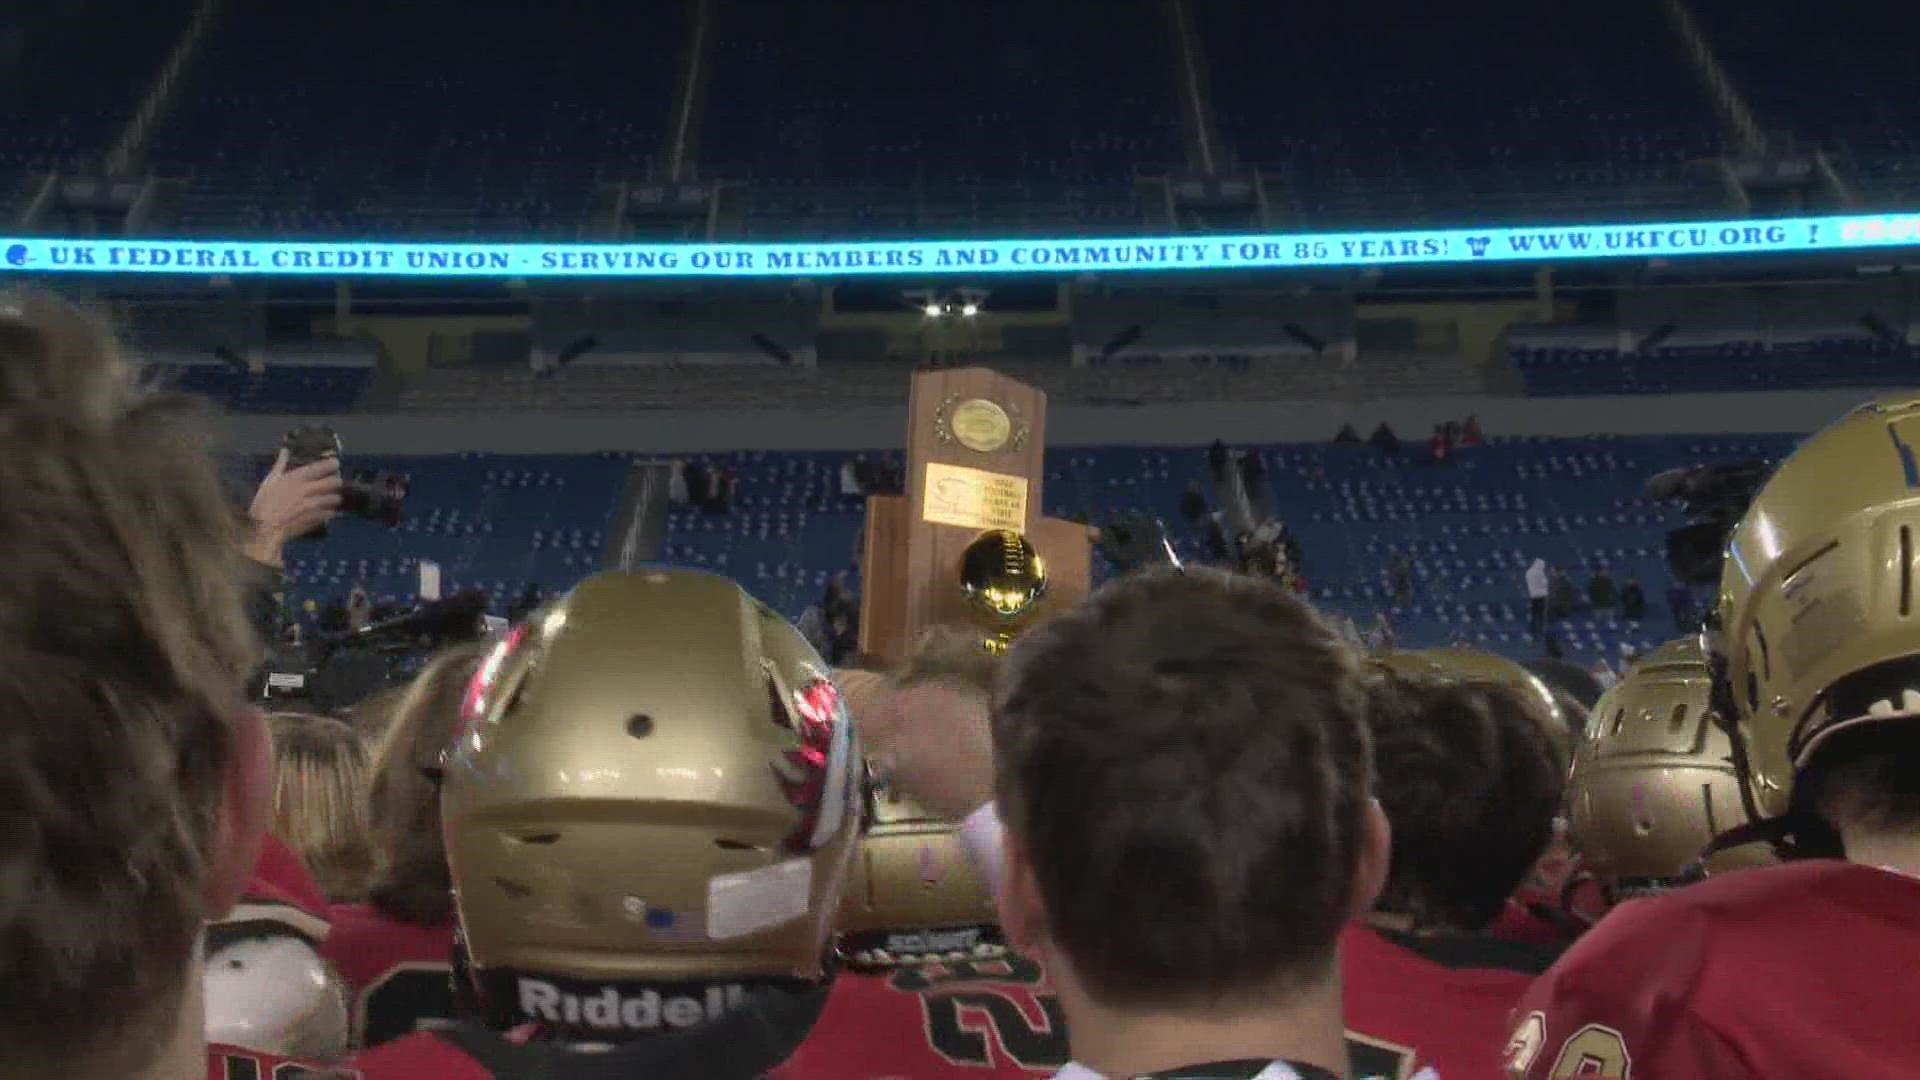 Last month the high school team made school history when they won the program's first-ever football state championship.